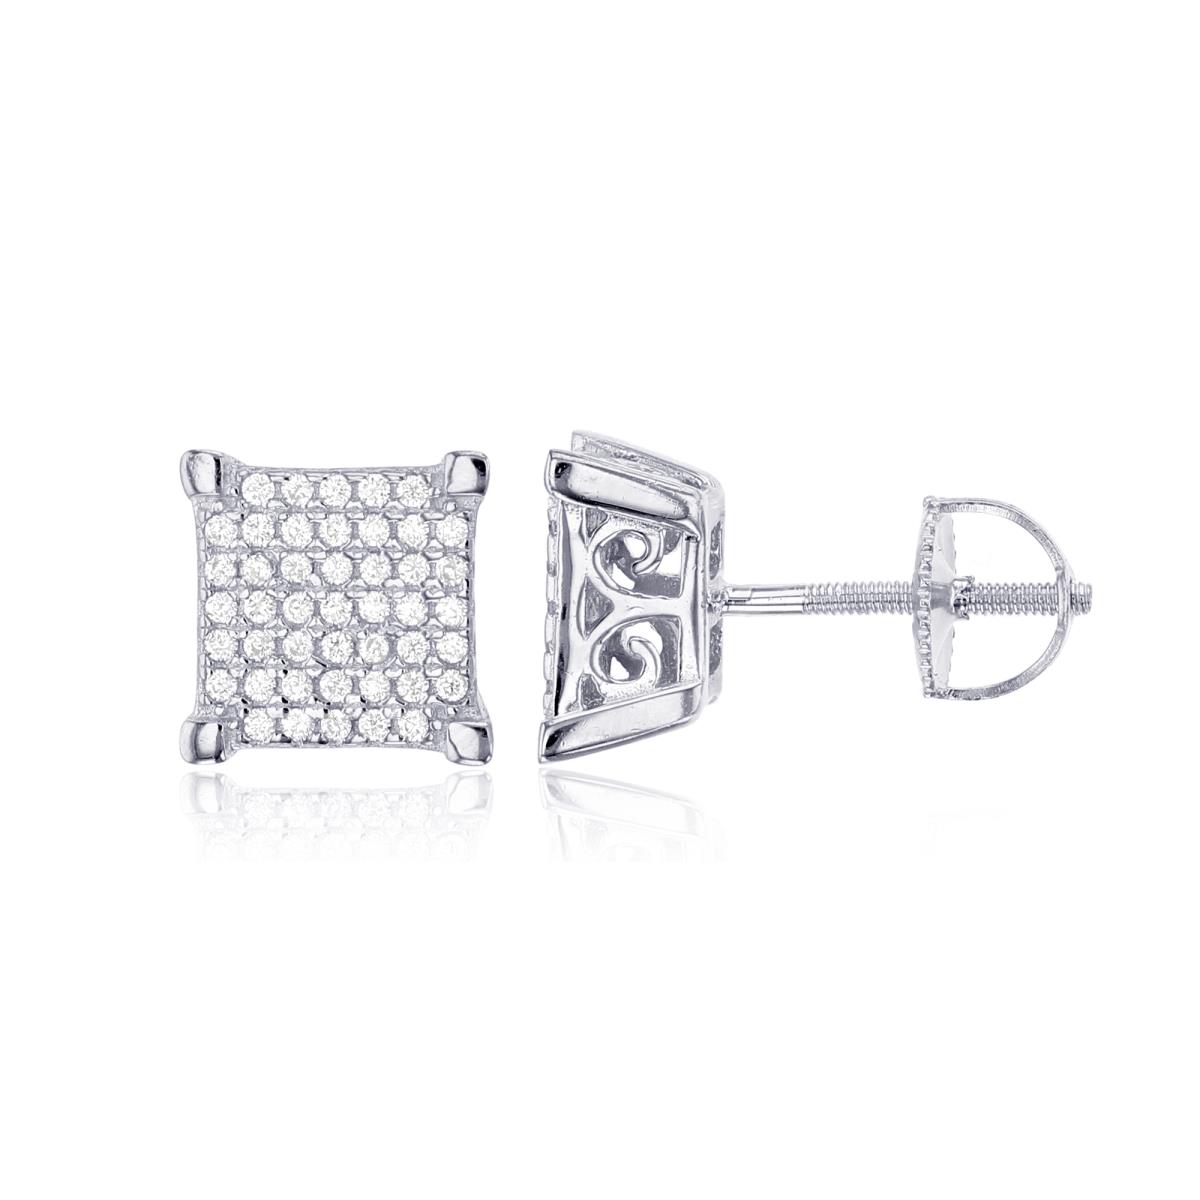 Sterling Silver Rhodium Micropave 7x7 Square Screw-Back Mens Basket Stud Earring